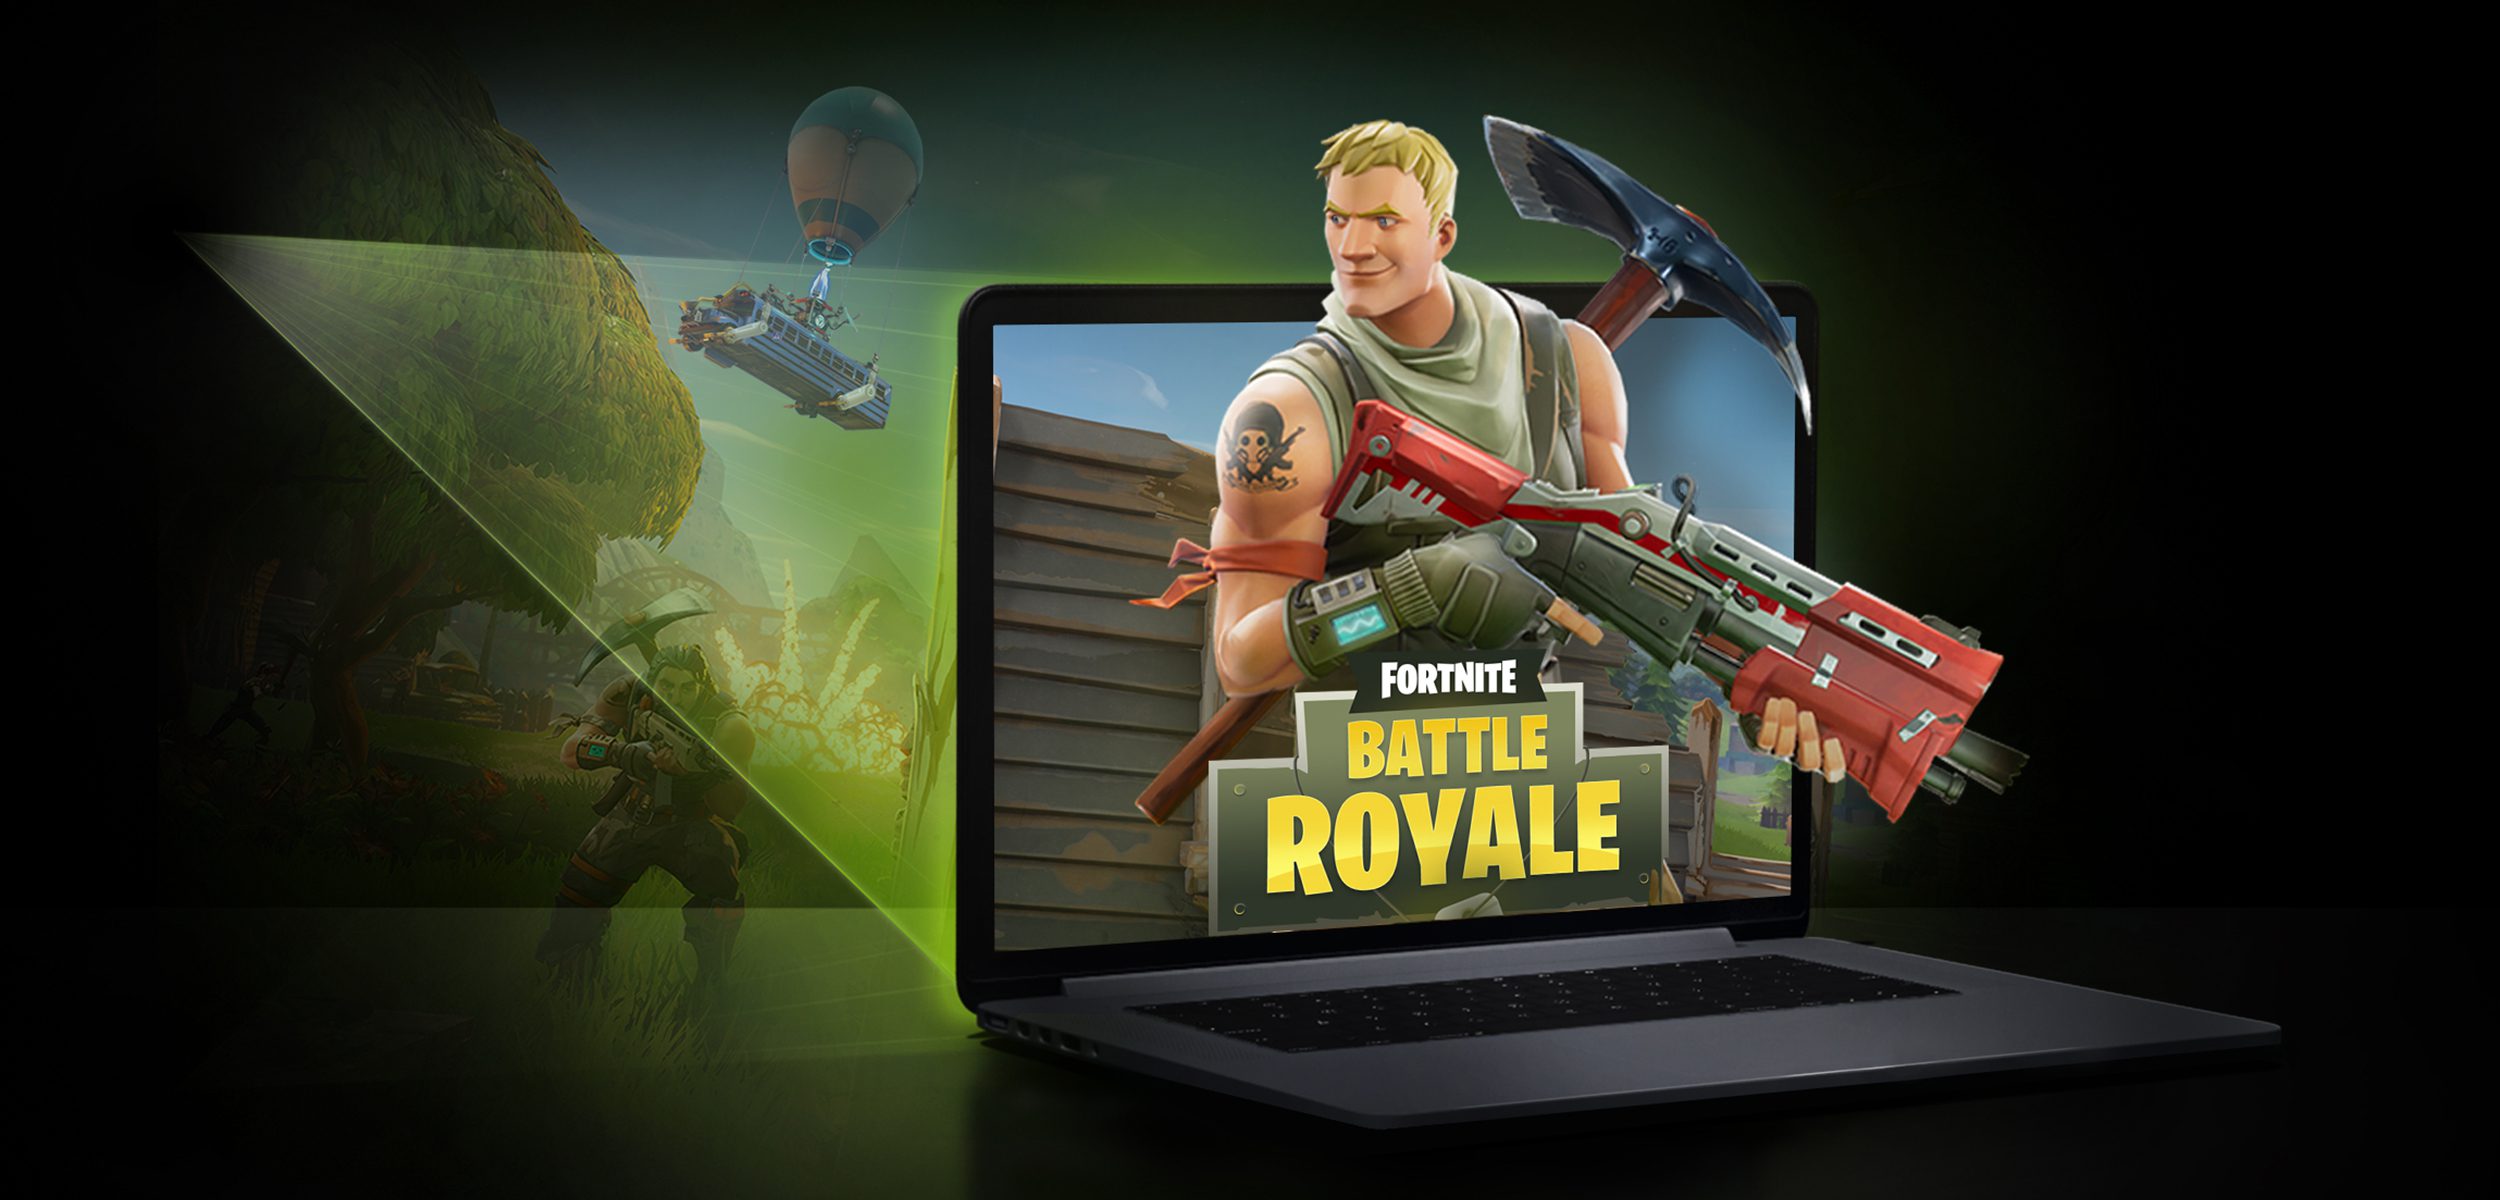 GeForce Now Lets you Stream Cutting Edge Games to your Potato